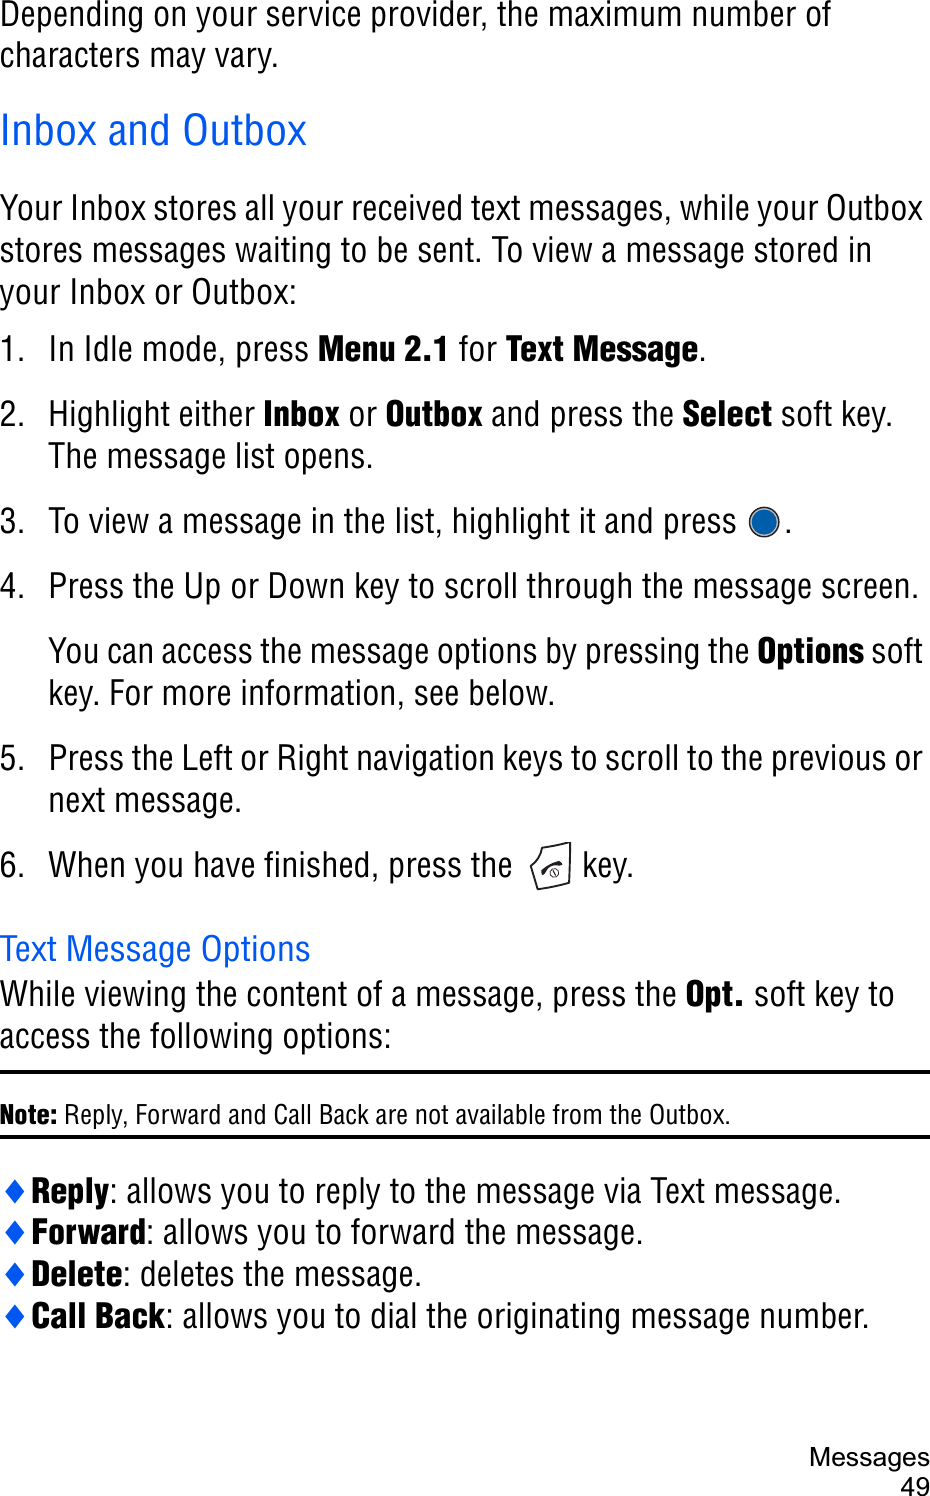 Messages49Depending on your service provider, the maximum number of characters may vary.Inbox and OutboxYour Inbox stores all your received text messages, while your Outbox stores messages waiting to be sent. To view a message stored in your Inbox or Outbox:1. In Idle mode, press Menu 2.1 for Text Message.2. Highlight either Inbox or Outbox and press the Select soft key. The message list opens. 3. To view a message in the list, highlight it and press  .4. Press the Up or Down key to scroll through the message screen.You can access the message options by pressing the Options soft key. For more information, see below.5. Press the Left or Right navigation keys to scroll to the previous or next message.6. When you have finished, press the   key.Text Message OptionsWhile viewing the content of a message, press the Opt. soft key to access the following options:Note: Reply, Forward and Call Back are not available from the Outbox.iReply: allows you to reply to the message via Text message.iForward: allows you to forward the message.iDelete: deletes the message.iCall Back: allows you to dial the originating message number.